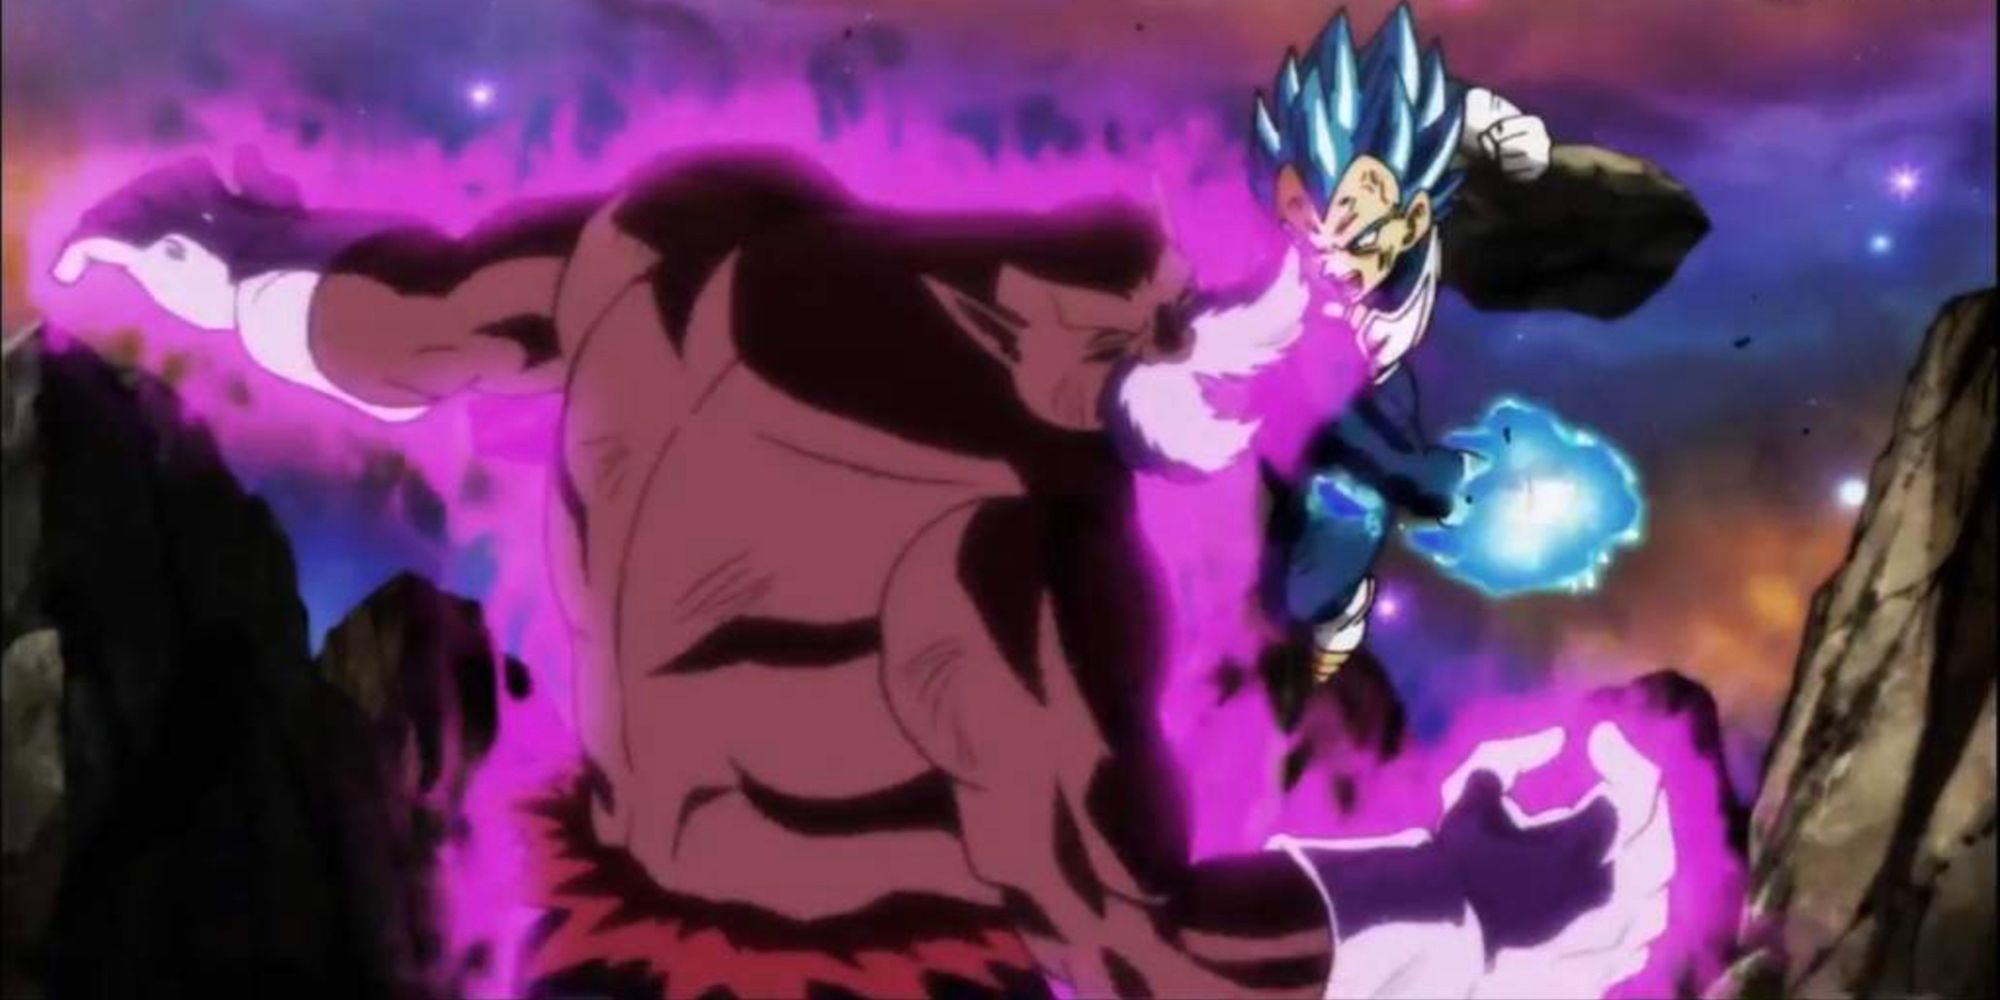 Dragon Ball 10 Facts You Need To Know About The Super Saiyan Blue Evolution